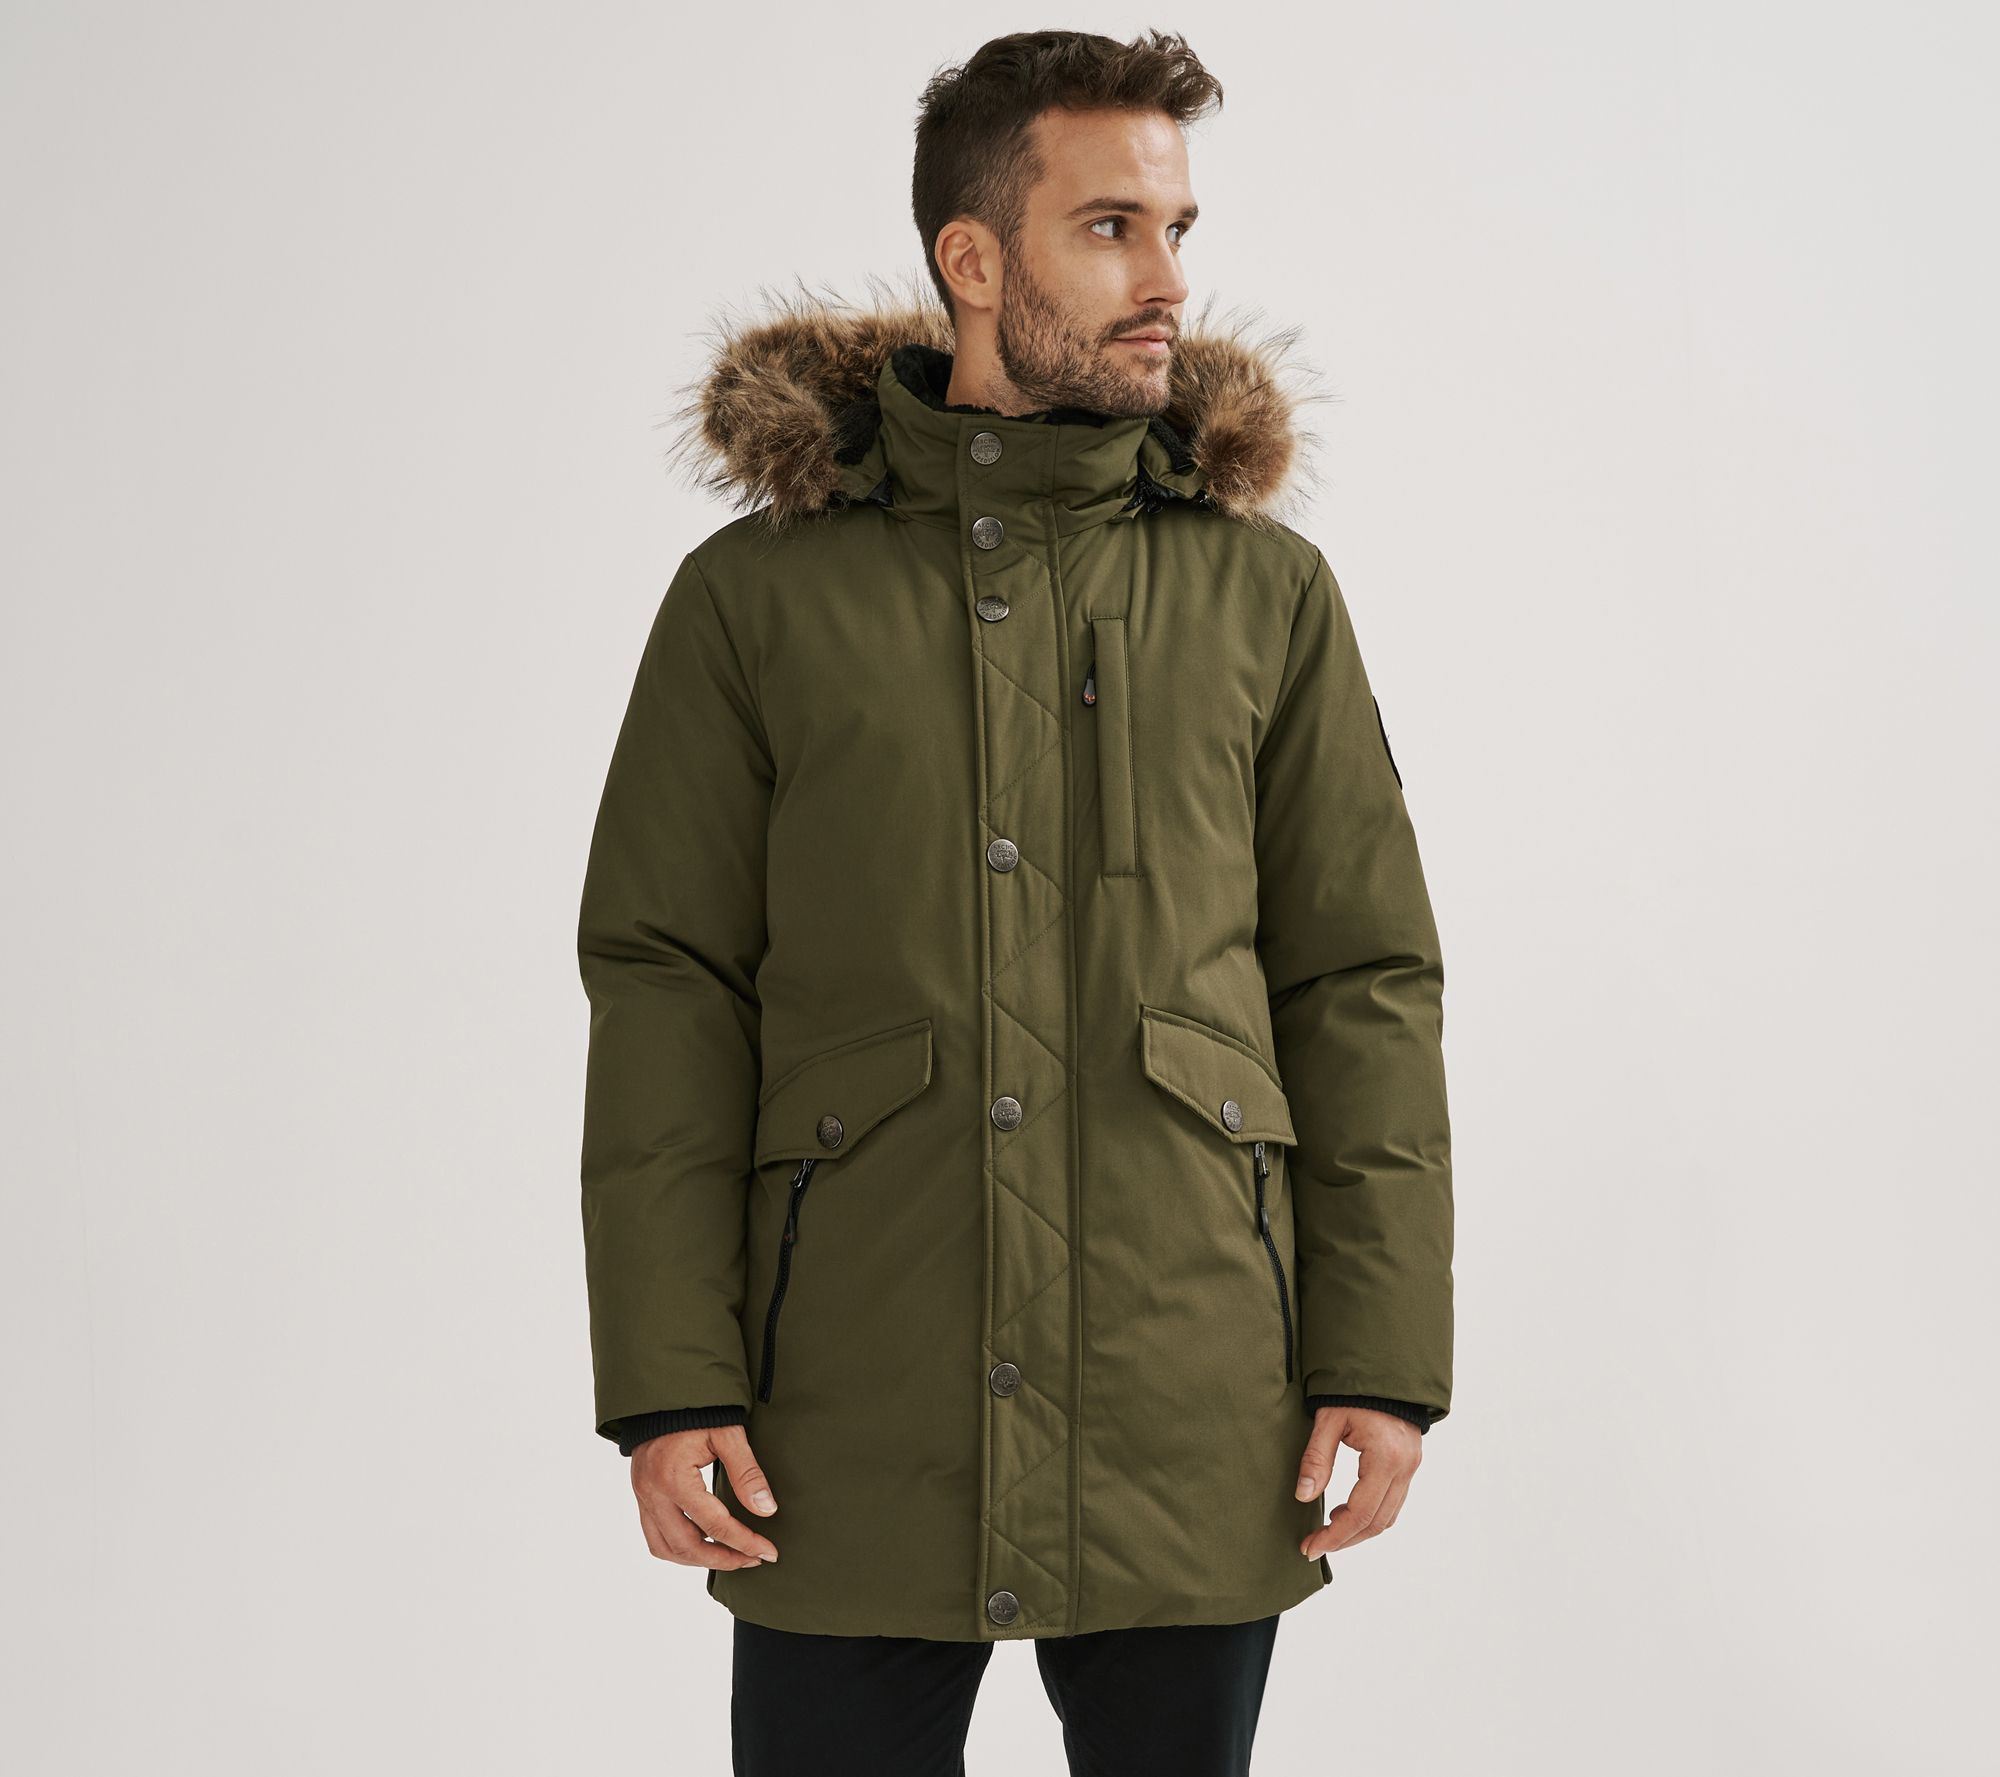 Arctic Expedition Men's Quilted Parka with Removable Hood - QVC.com